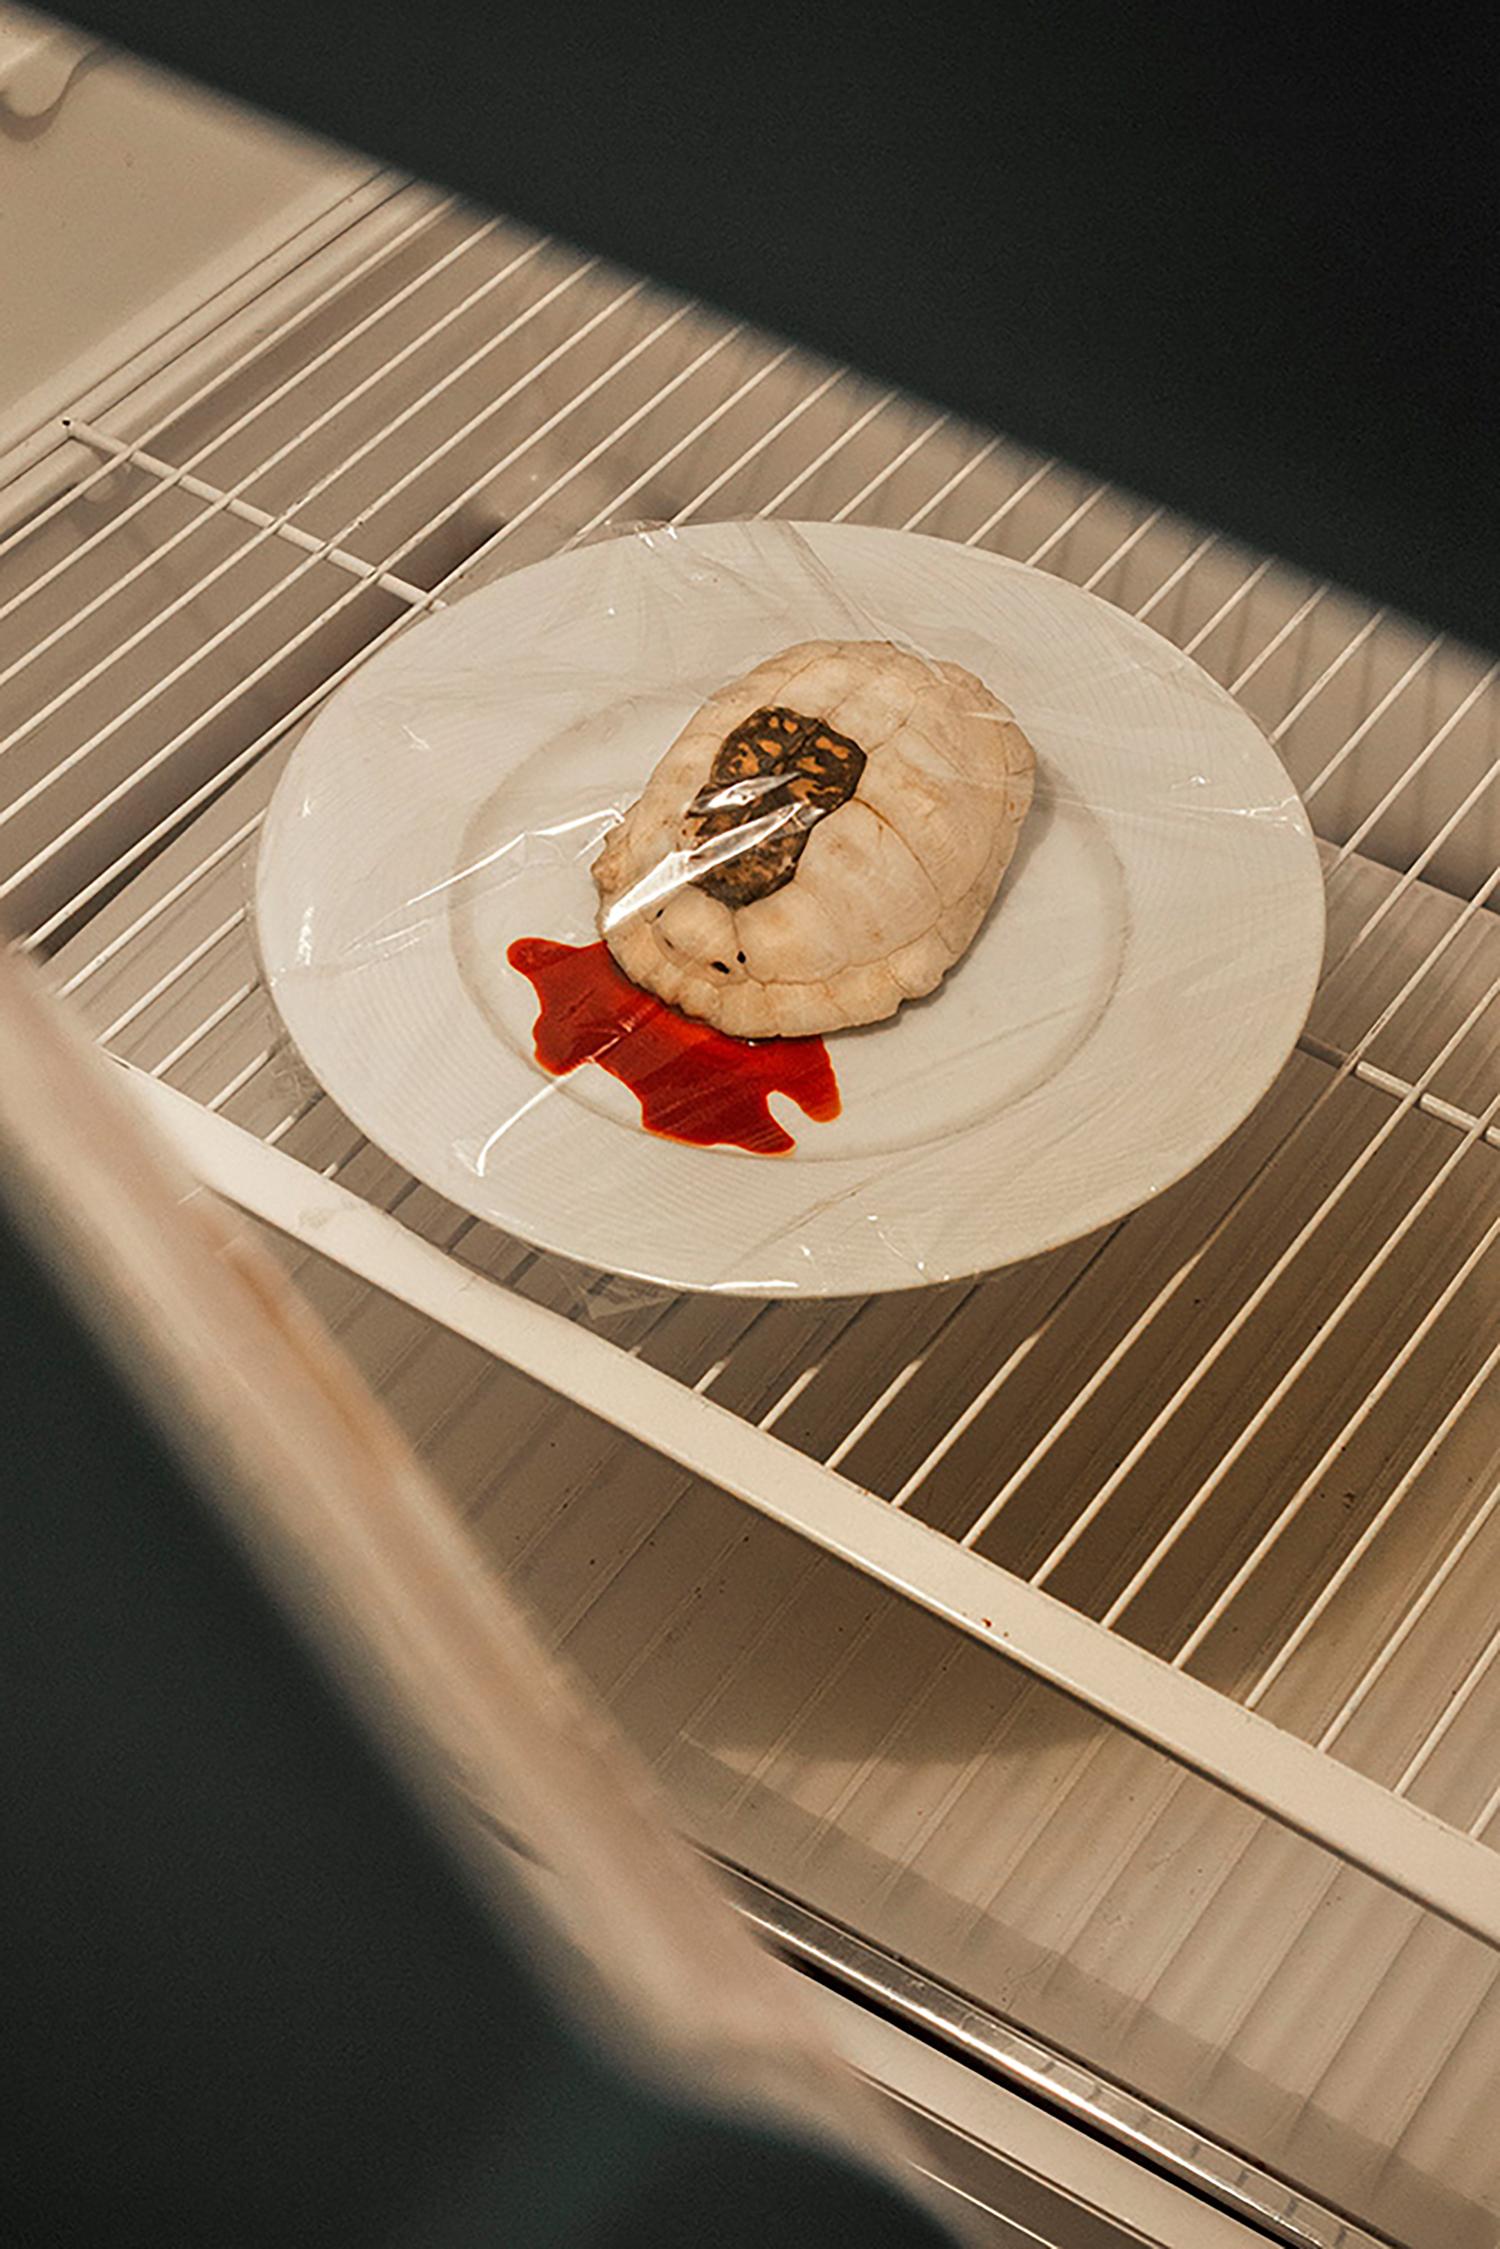 Shannon Davis Still-Life Photograph - "Leftover" Southern, turtle, food, conceptual, still life photography, white